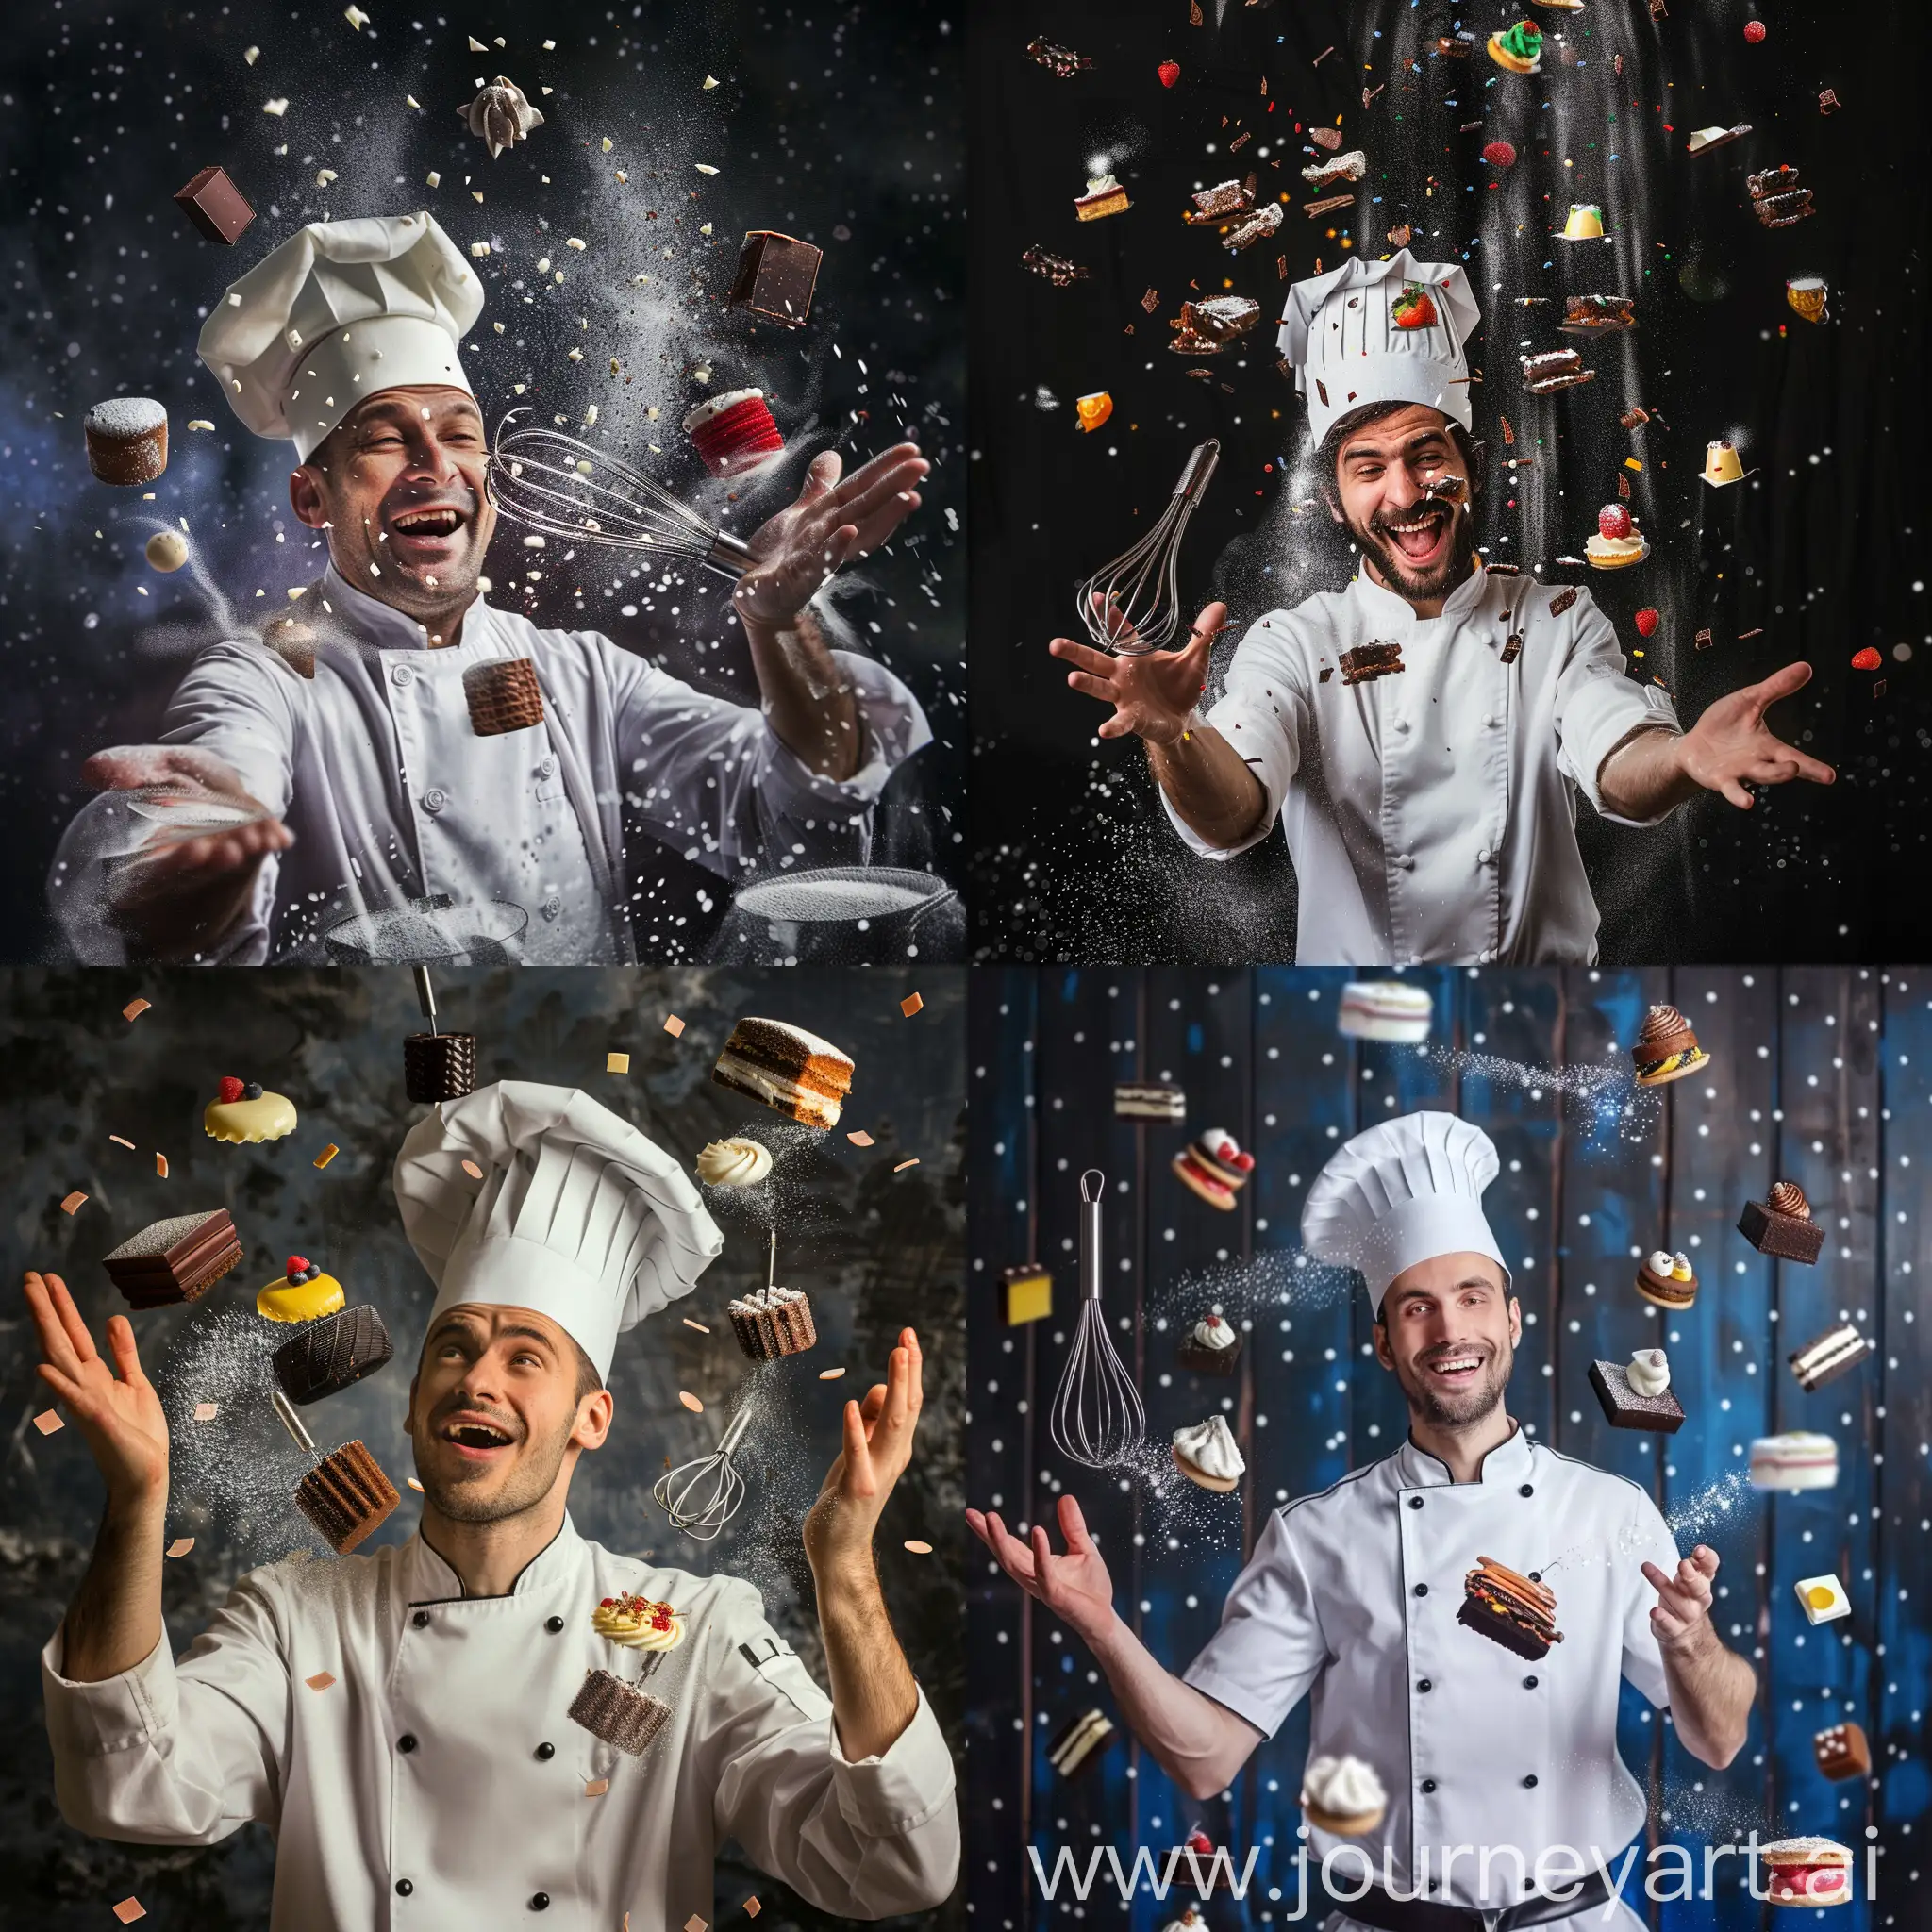 chef with a whisk pretending to do magic with flying desserts